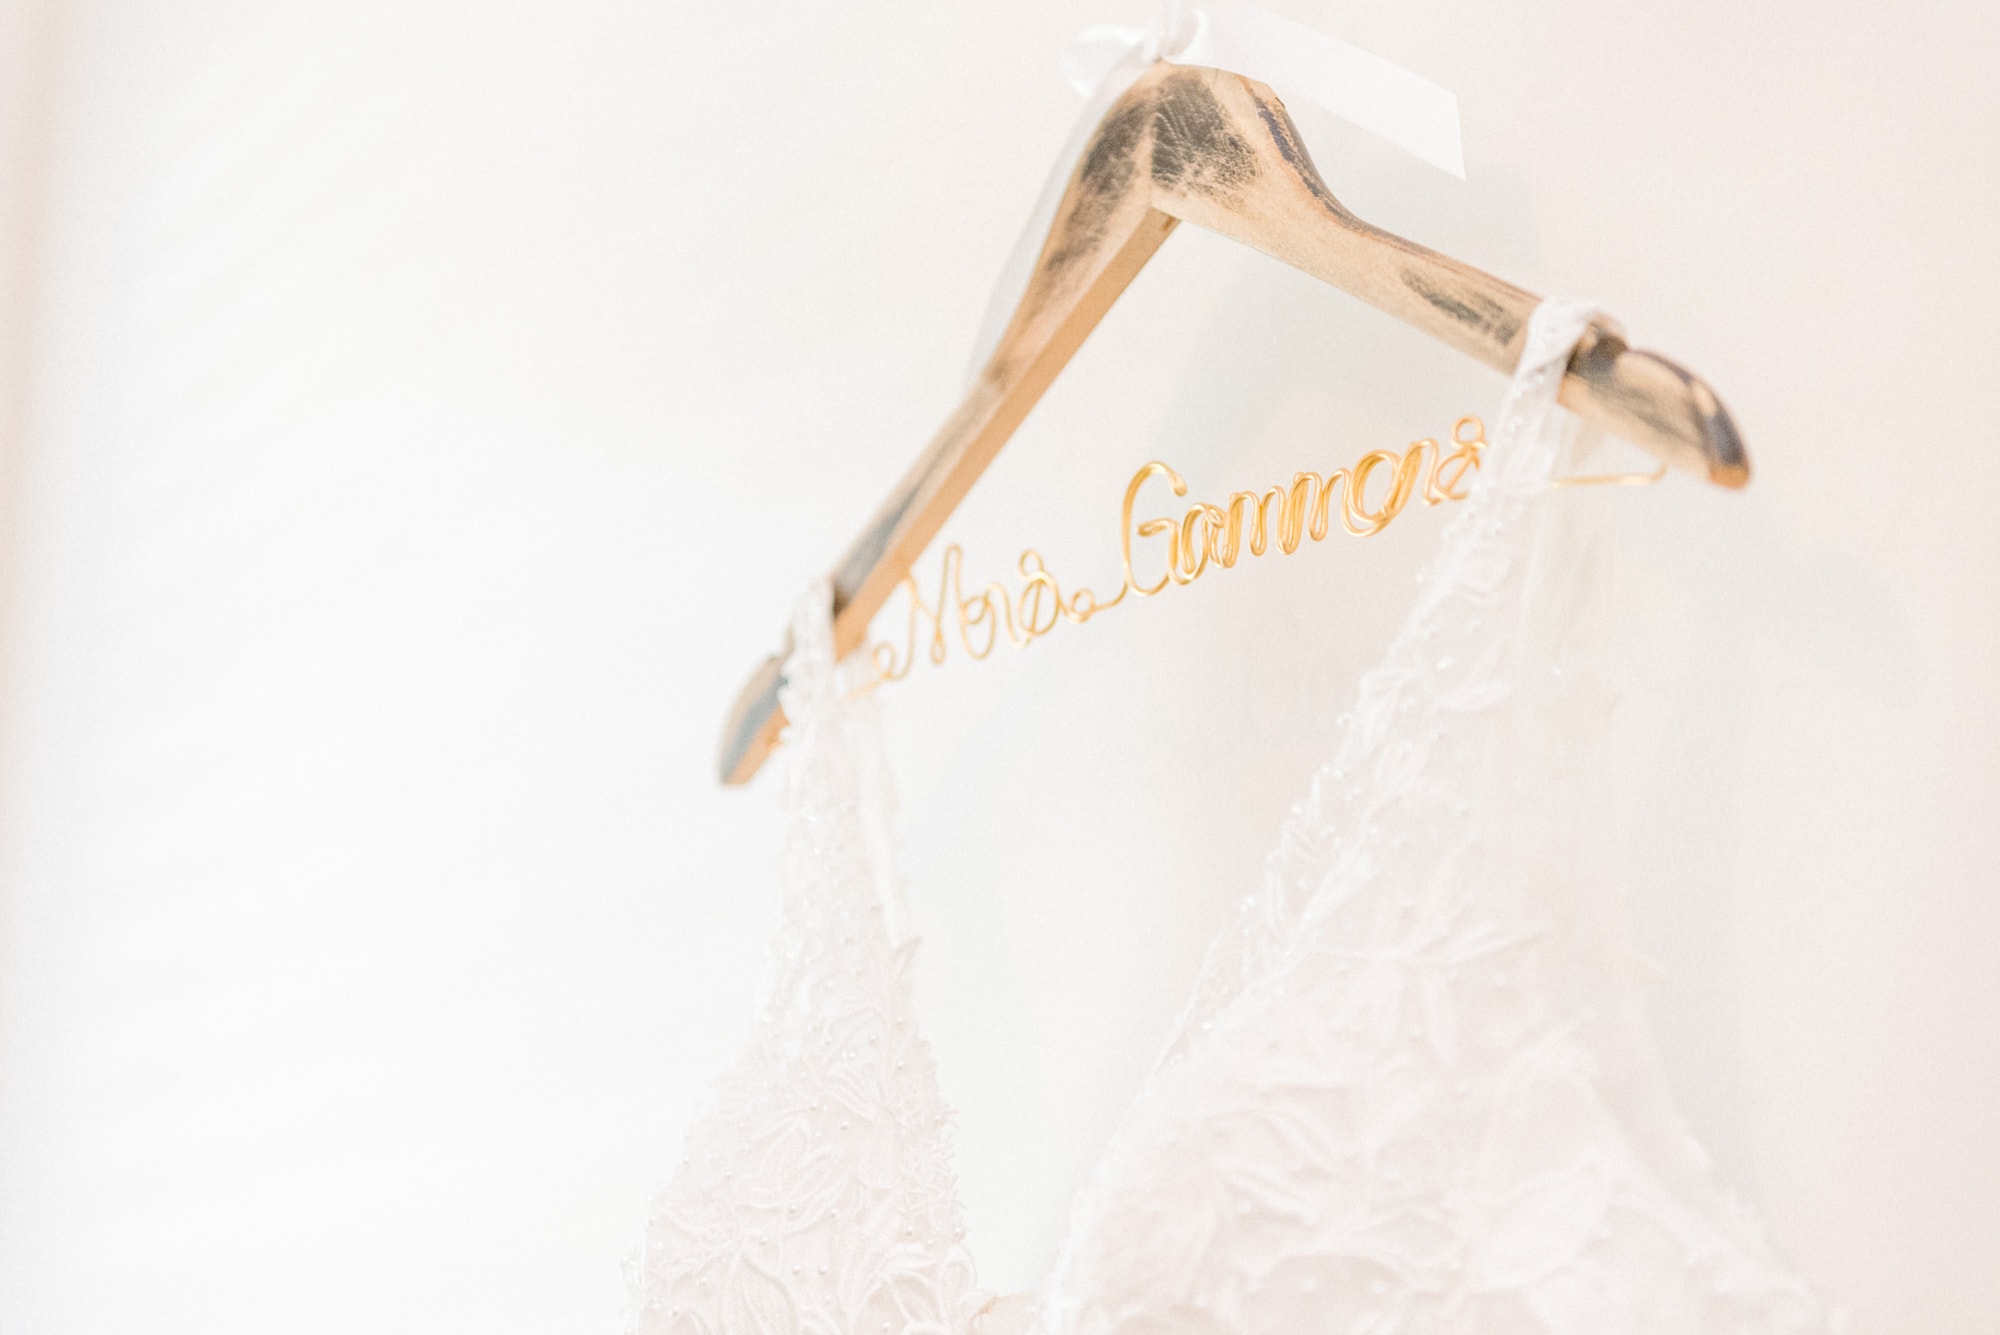 The hanger holding the bride's dress at Low Meadows Estate reads Mrs. Gammons in gold lettering.